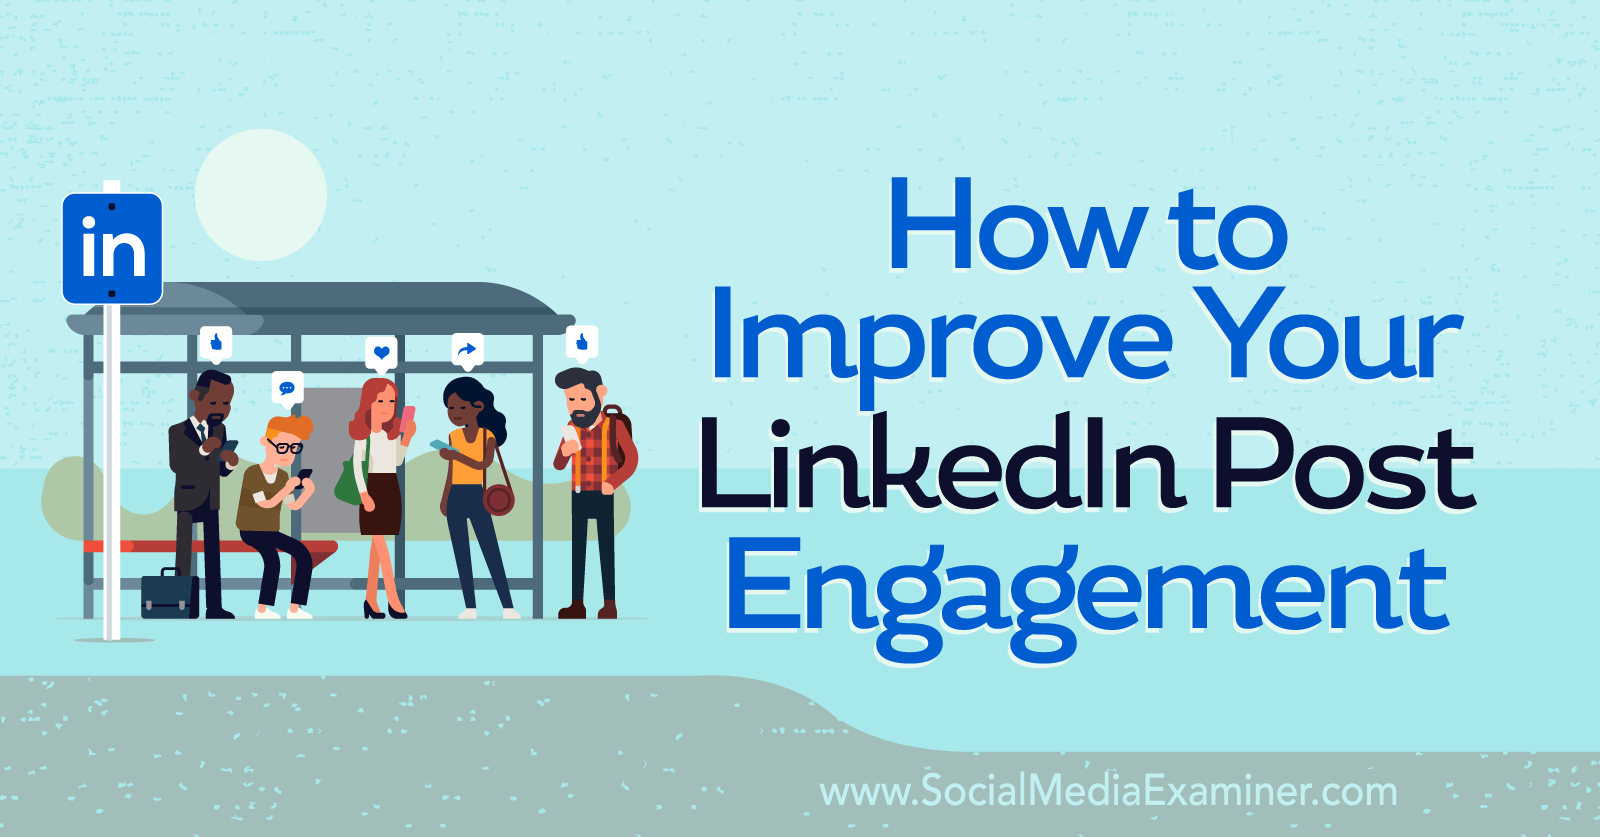 How to Improve Your LinkedIn Post Engagement-Social Media Examiner